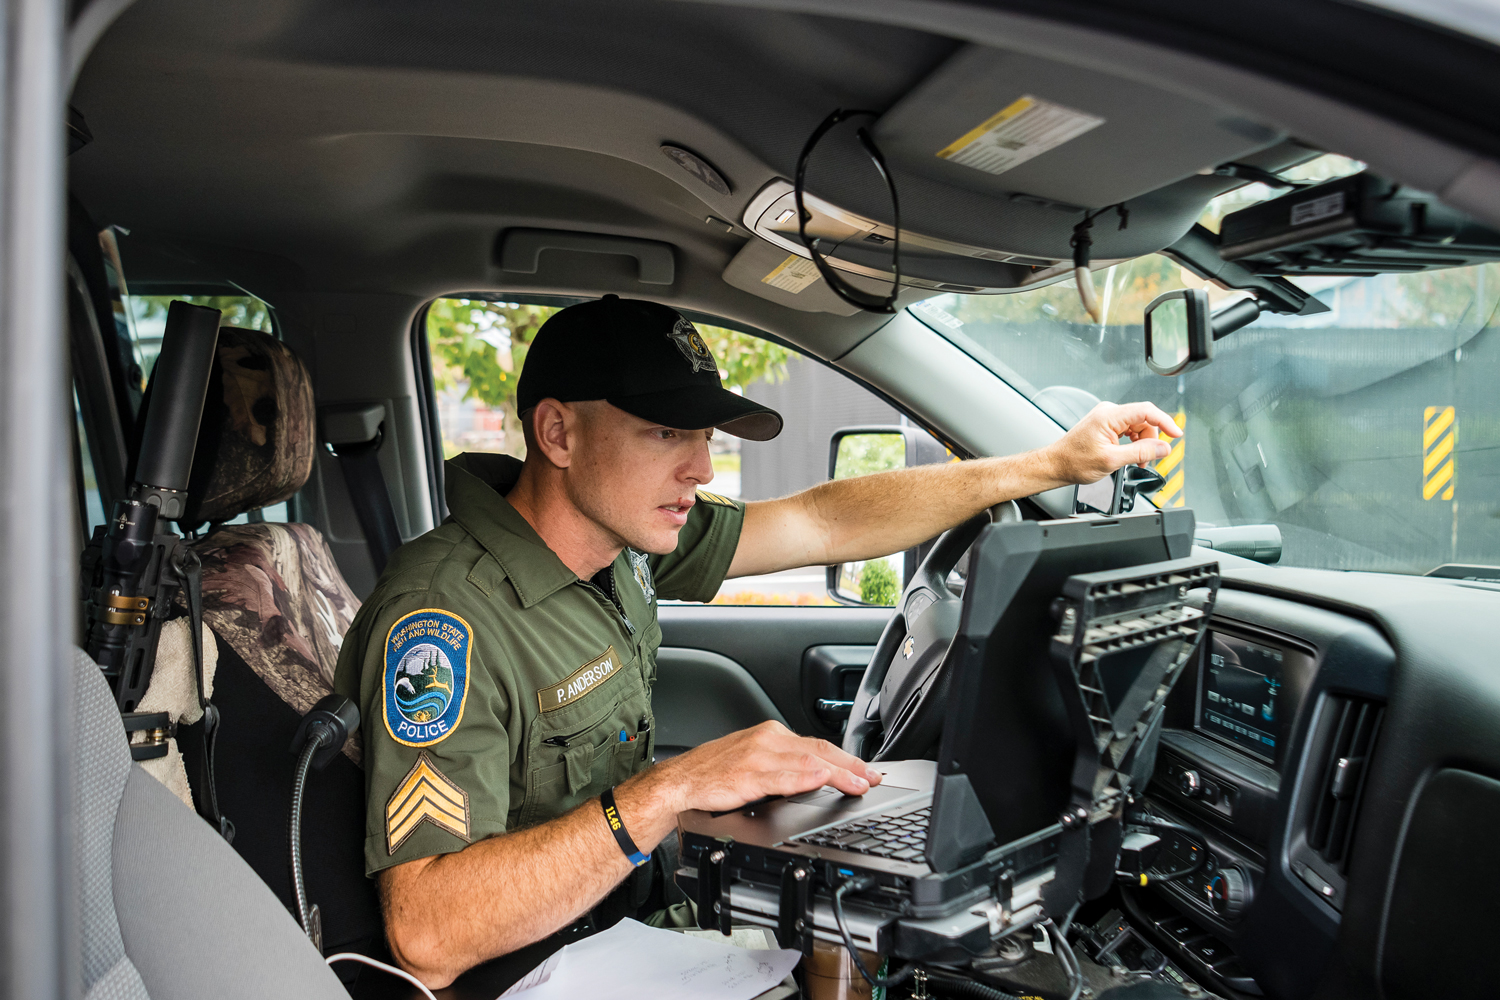 Sgt. Patrick Anderson in an vehicle using a laptop